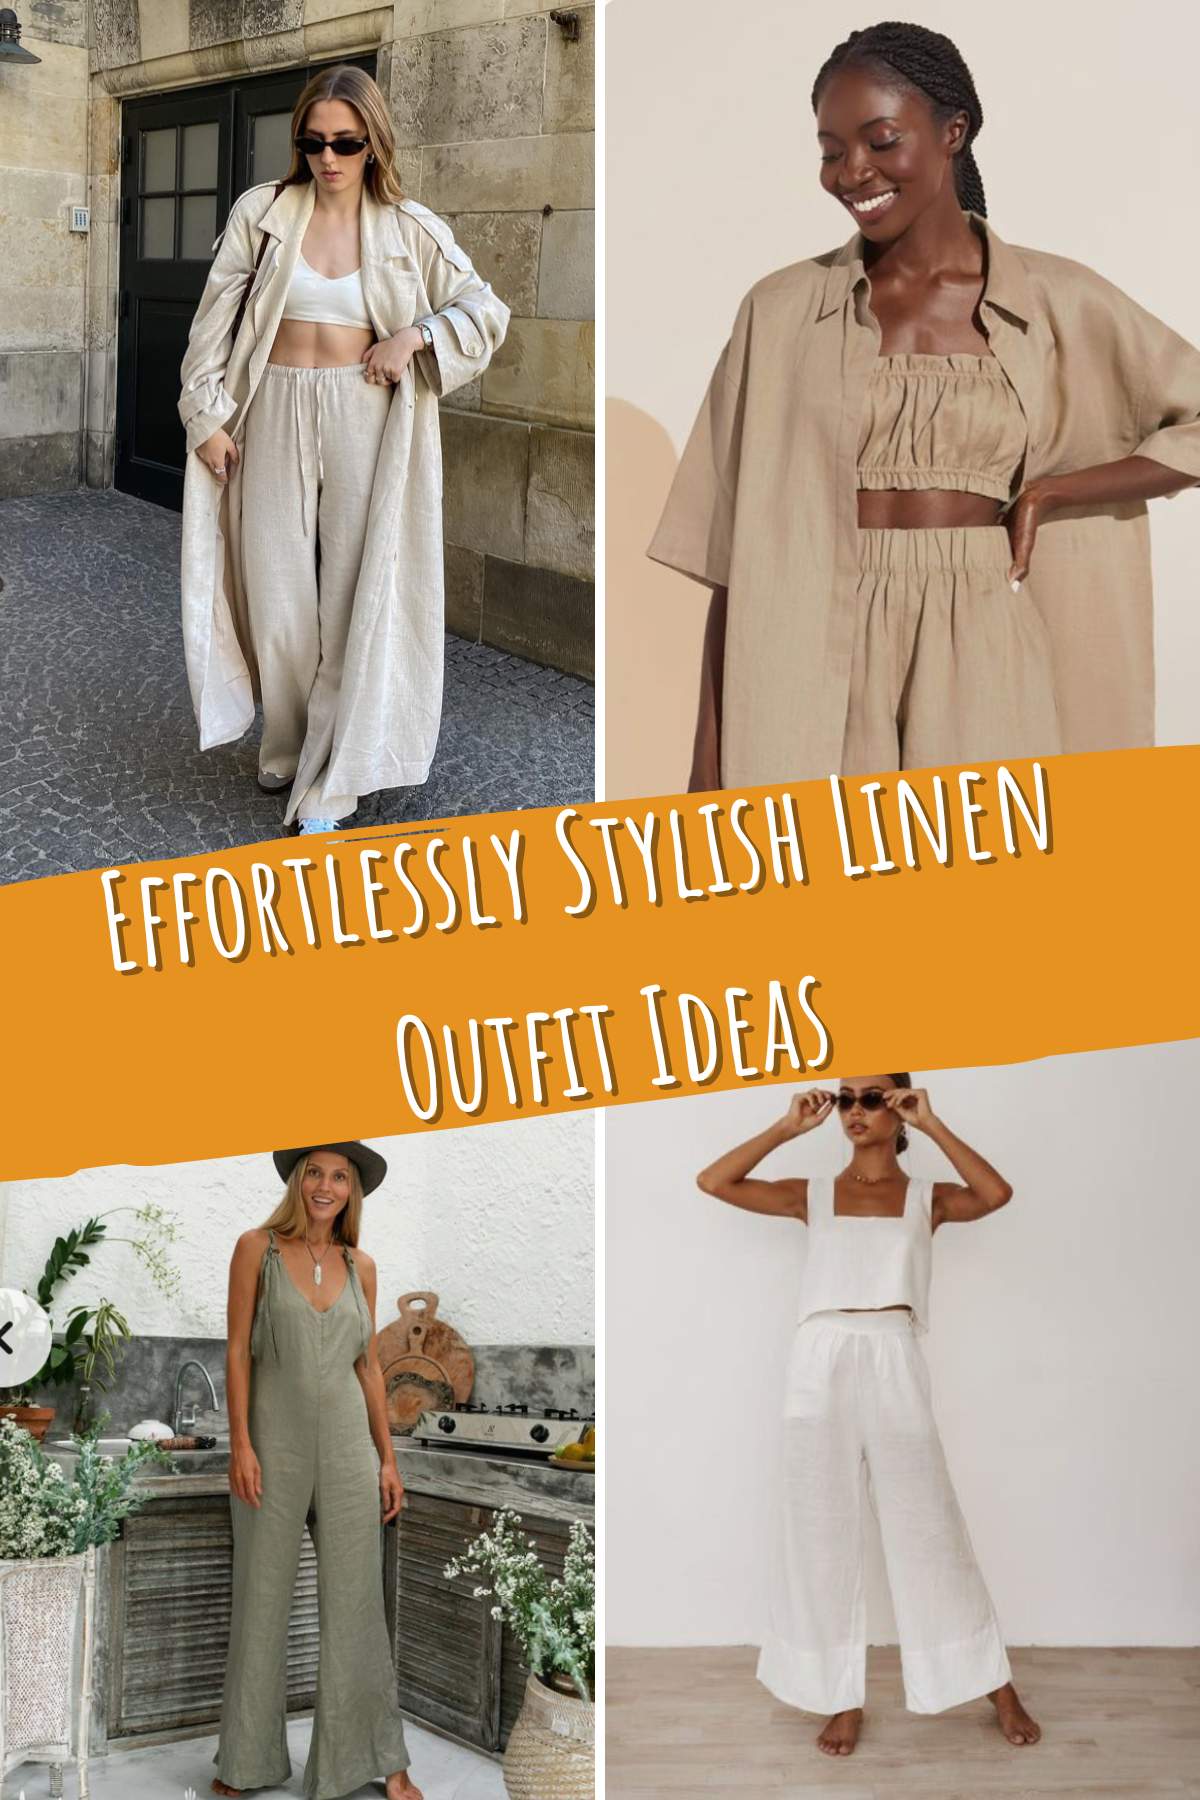 Effortlessly stylish linen outfit ideas. 4 different photo examples.